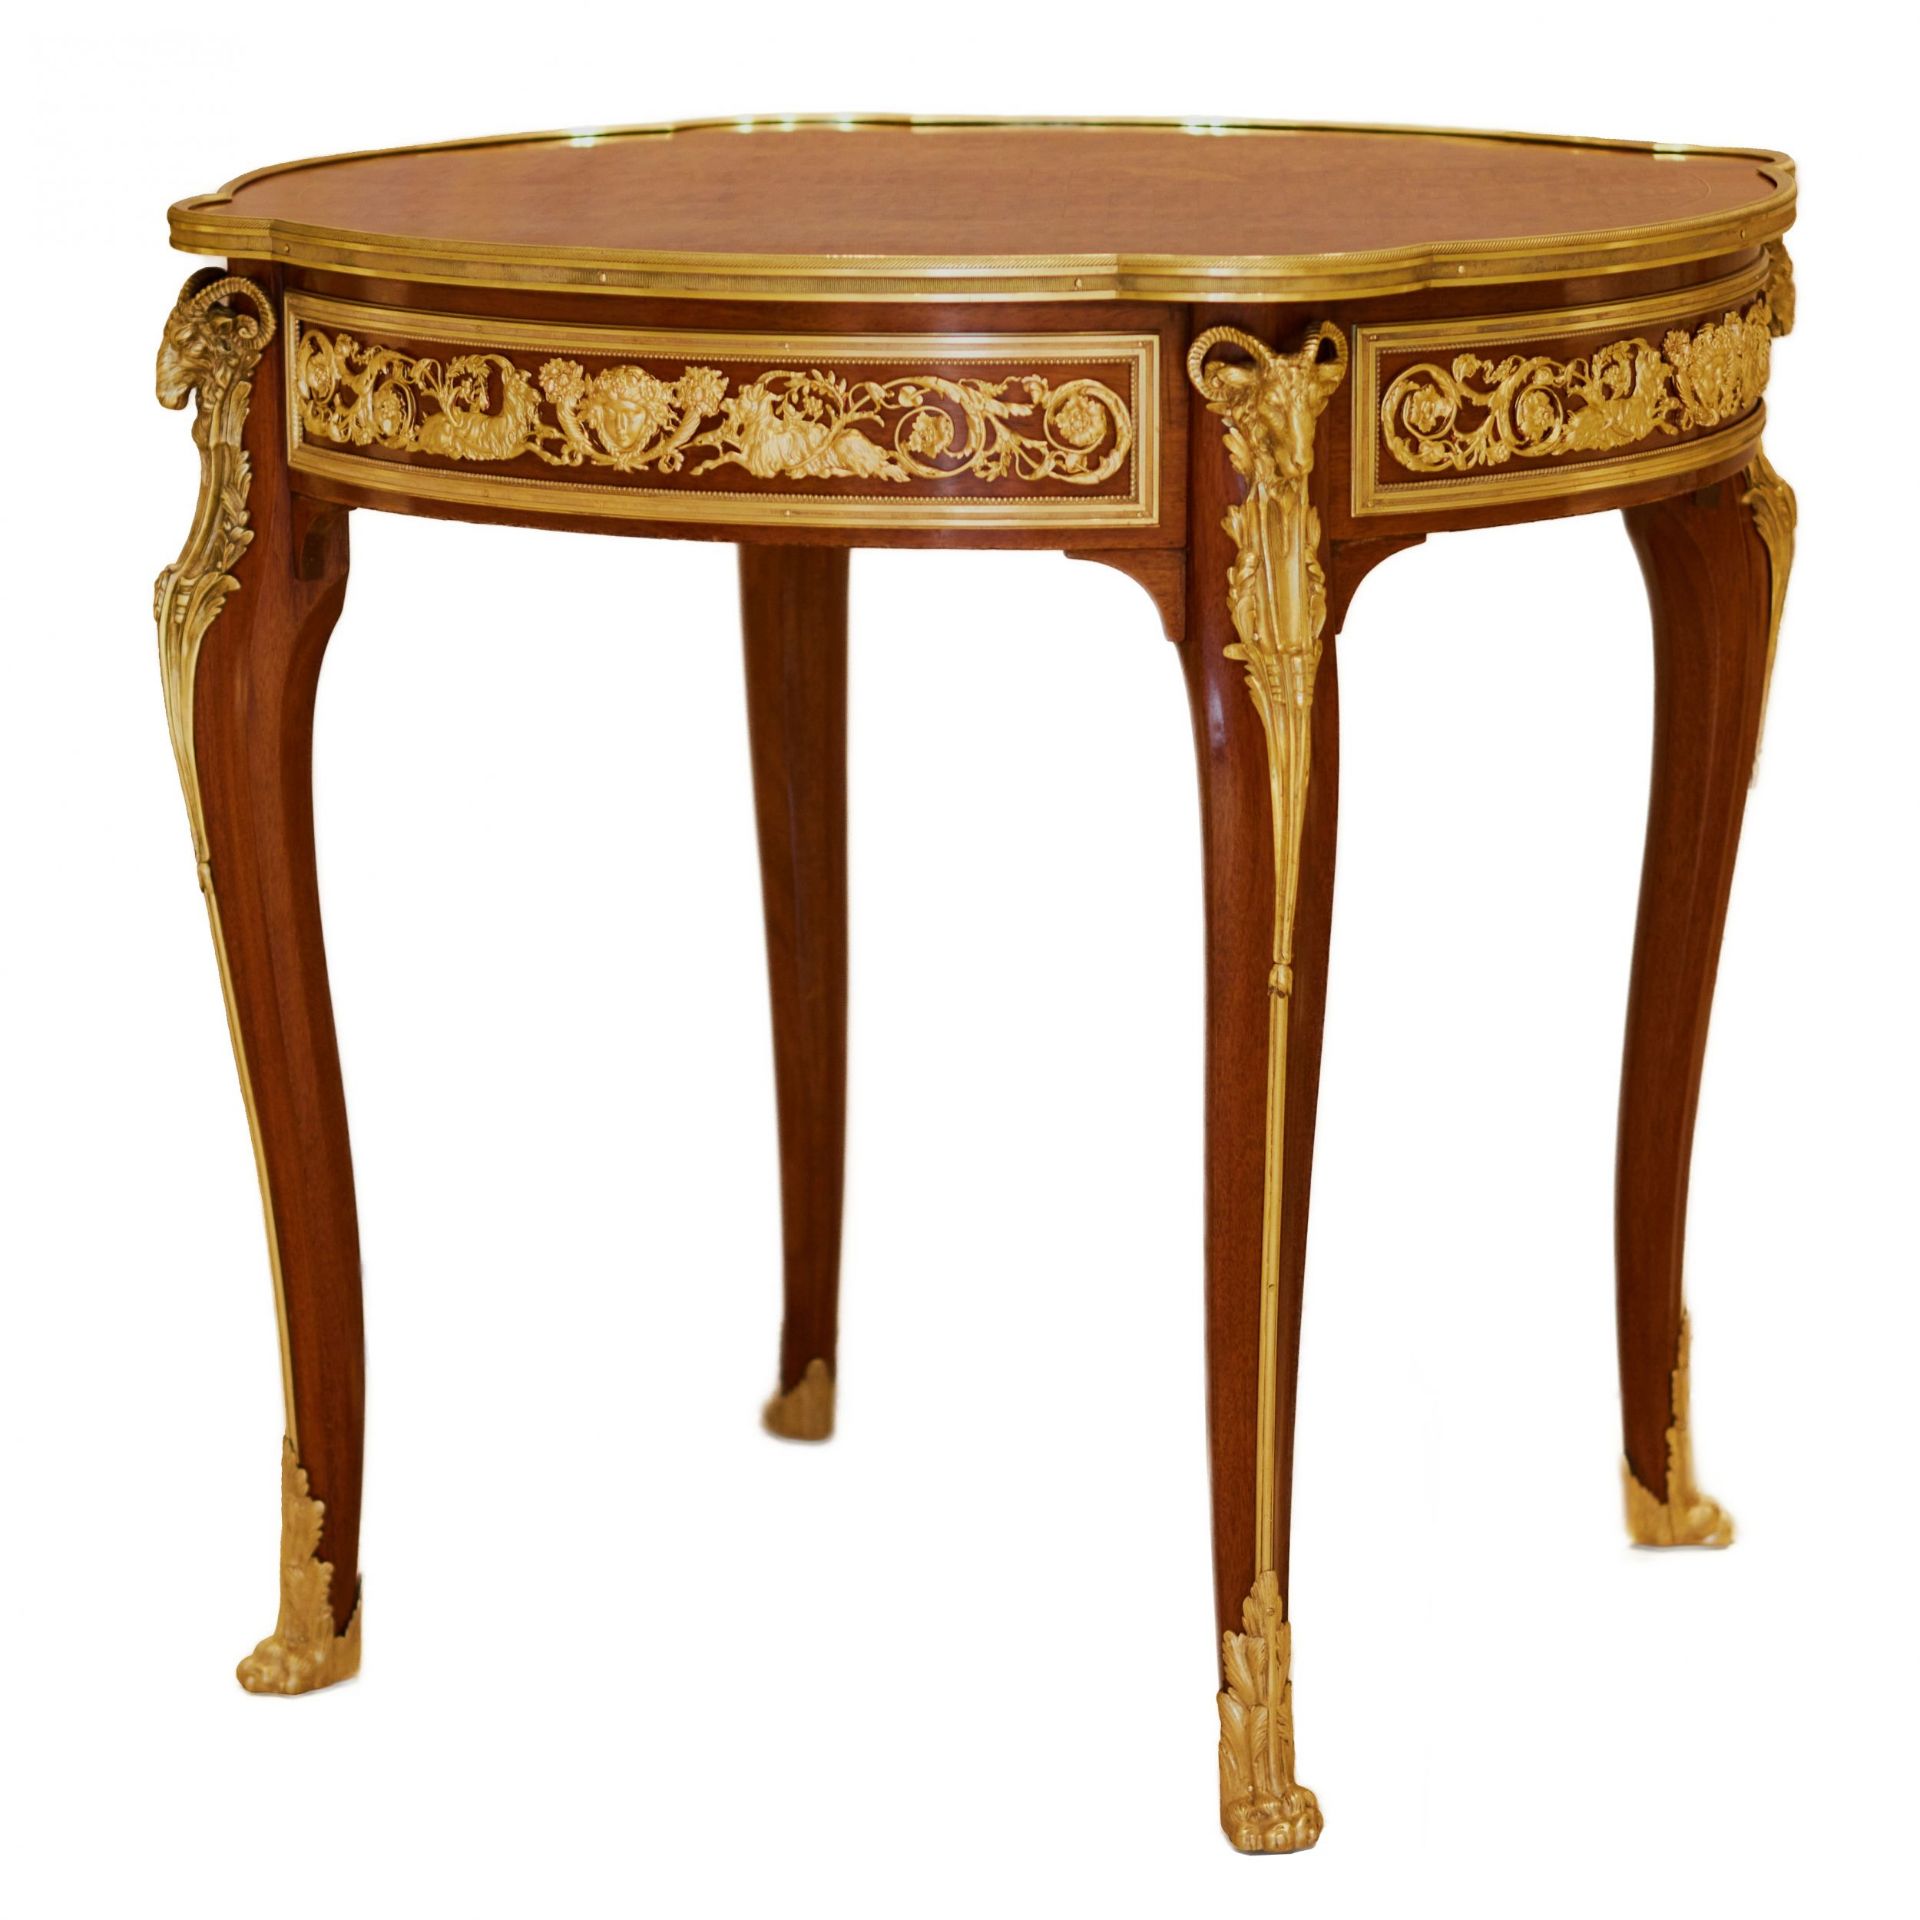 Mahogany table decorated with marquetry in the style of Louis XV, Francois Linke. Late 19th century - Bild 4 aus 6